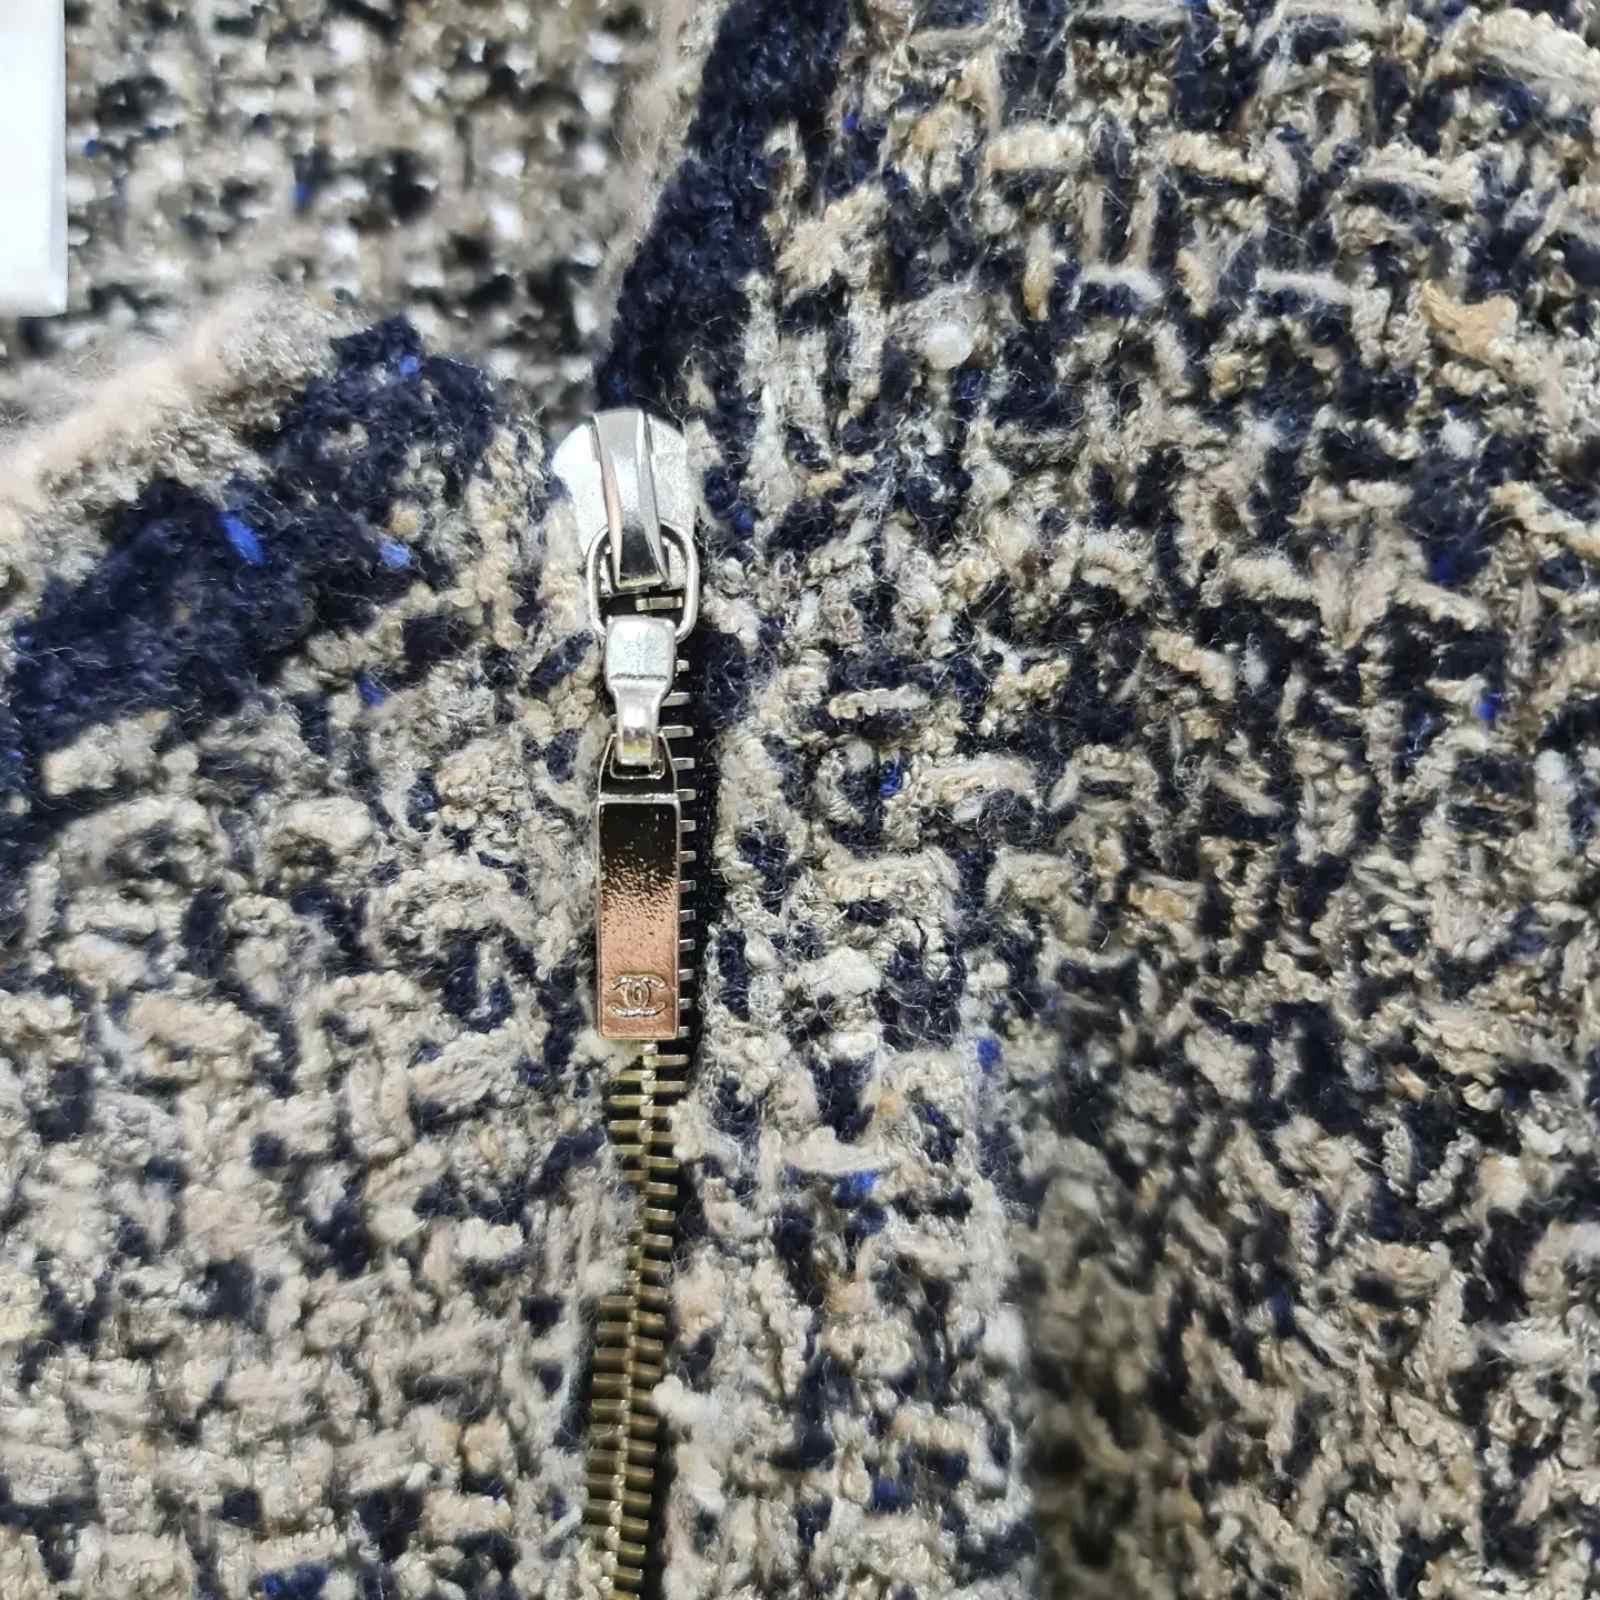 CHANEL A/W 2011 silk cashmere boucle side zipper jacket.
Hues of gray, blue, beige, and brown.
Long sleeves with single button closure at cuff.
Two way metal zipper closure traversing diagonally along front left side.
Two front patch pockets with